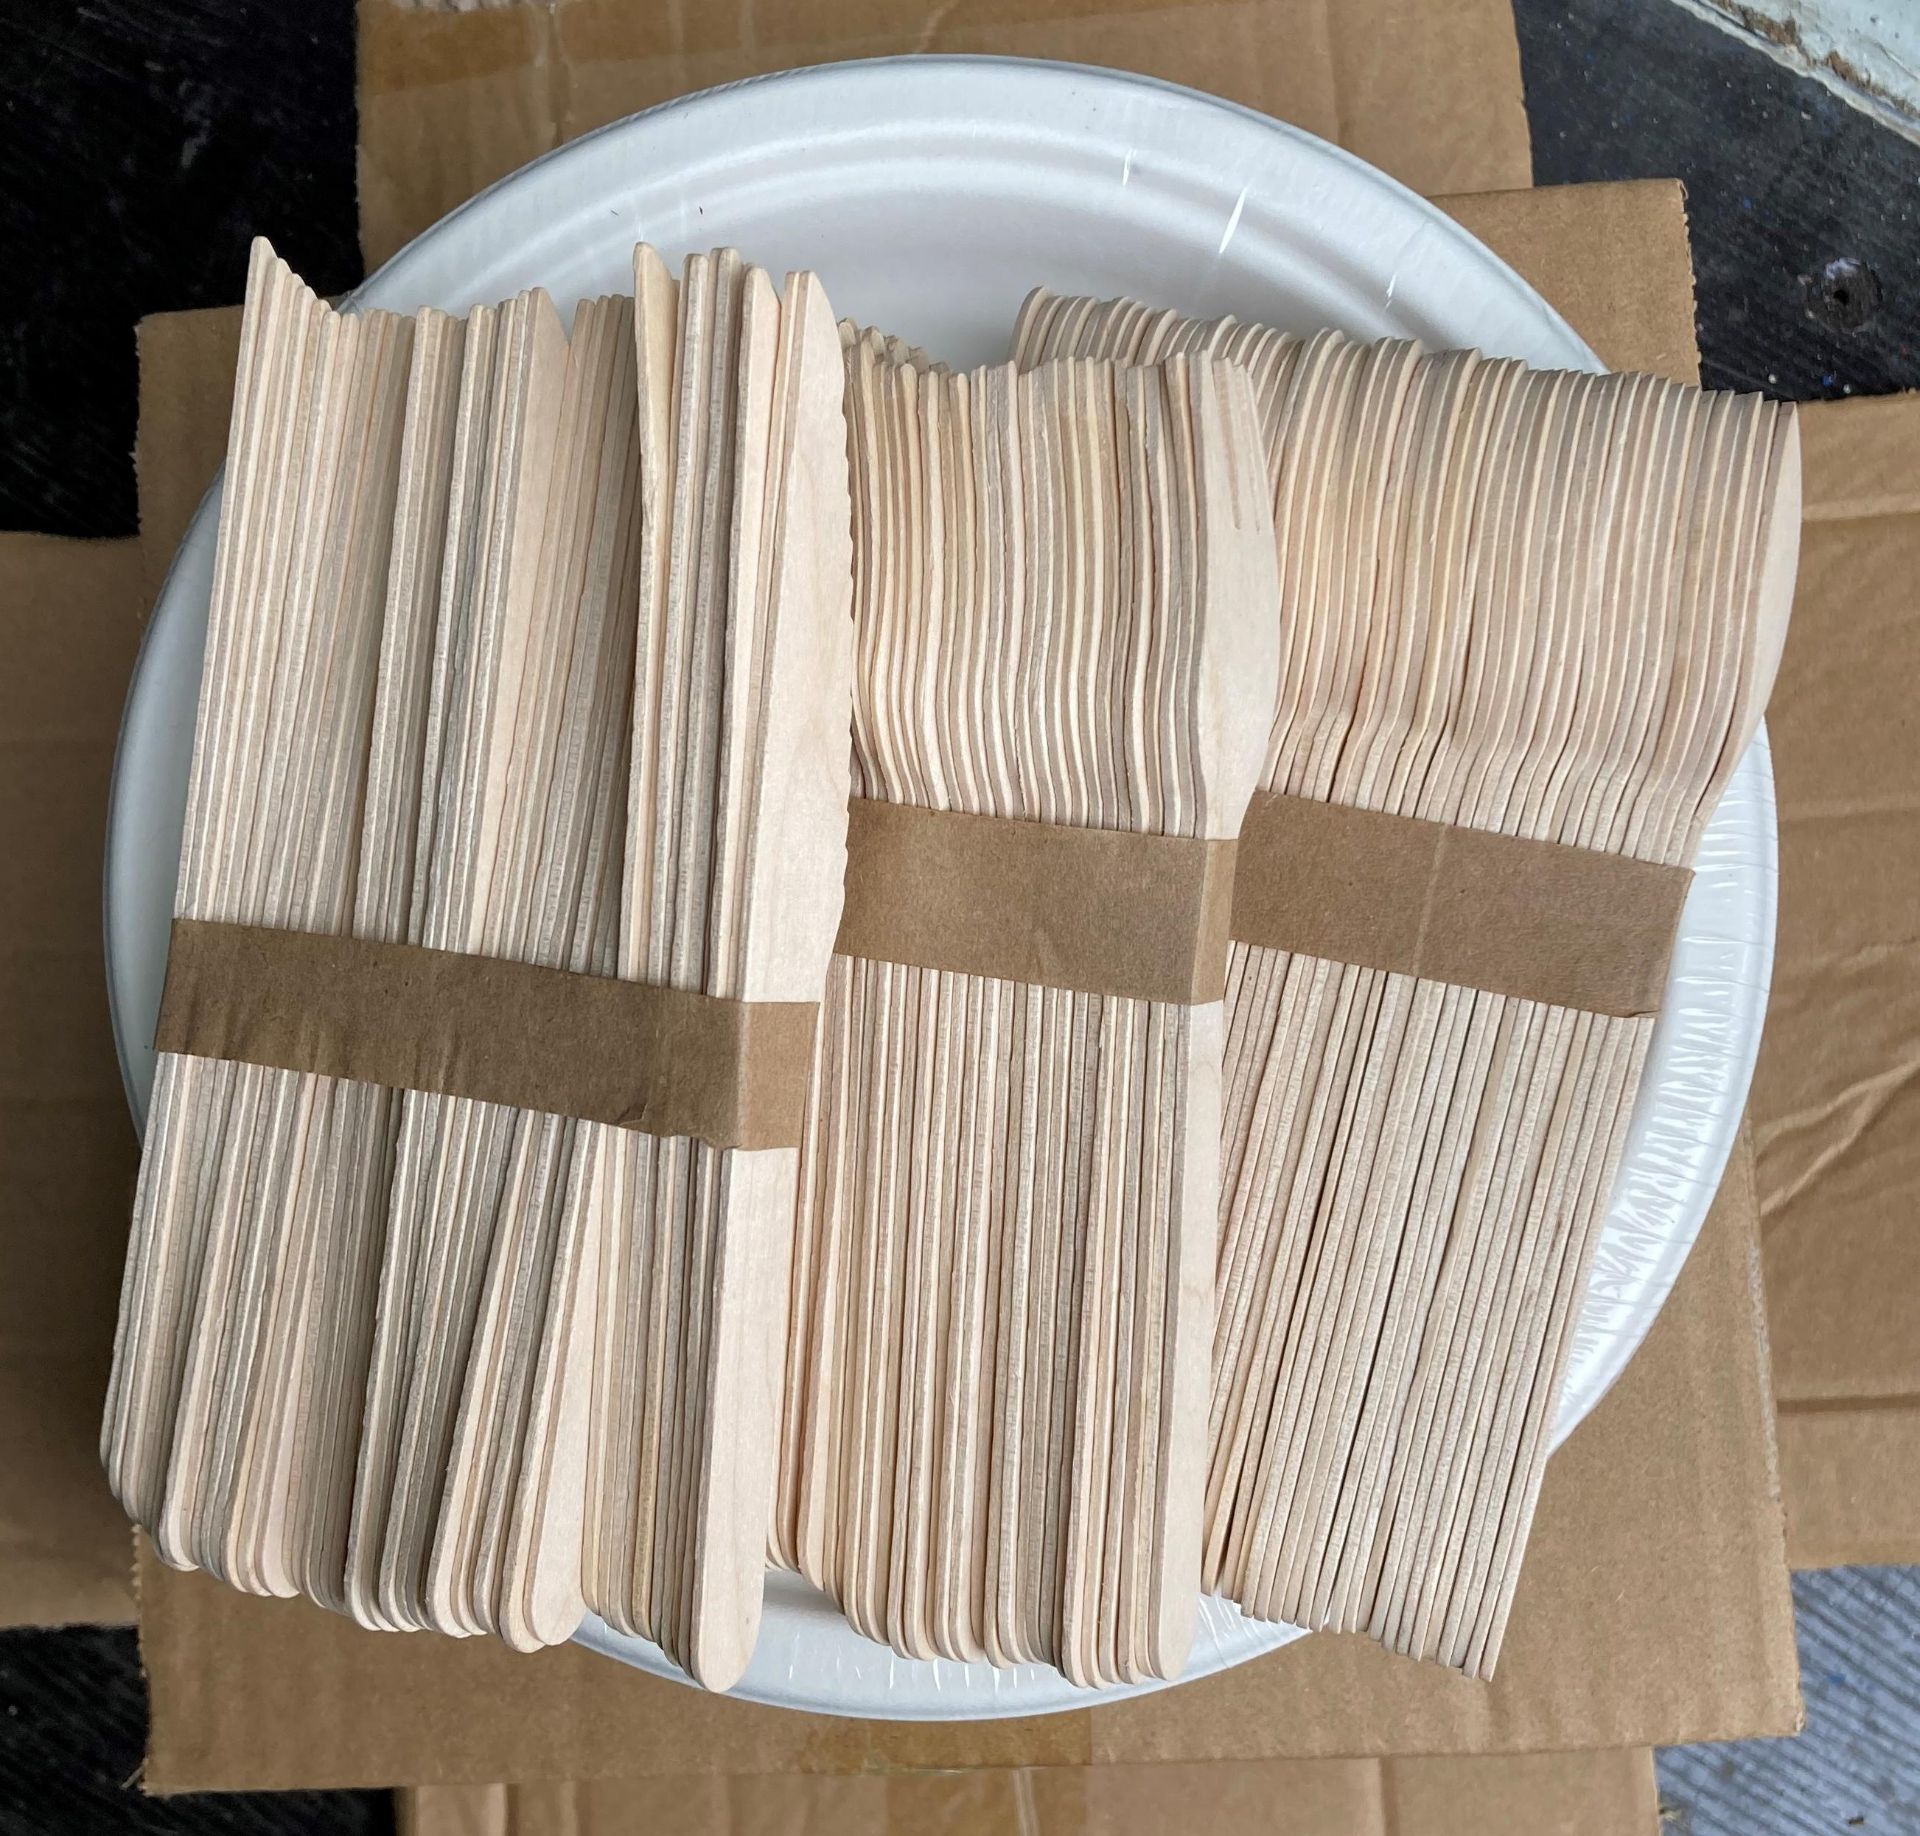 12 x packs and contents of approximately 60 x paper plates, sets of wooden knives, - Image 3 of 5